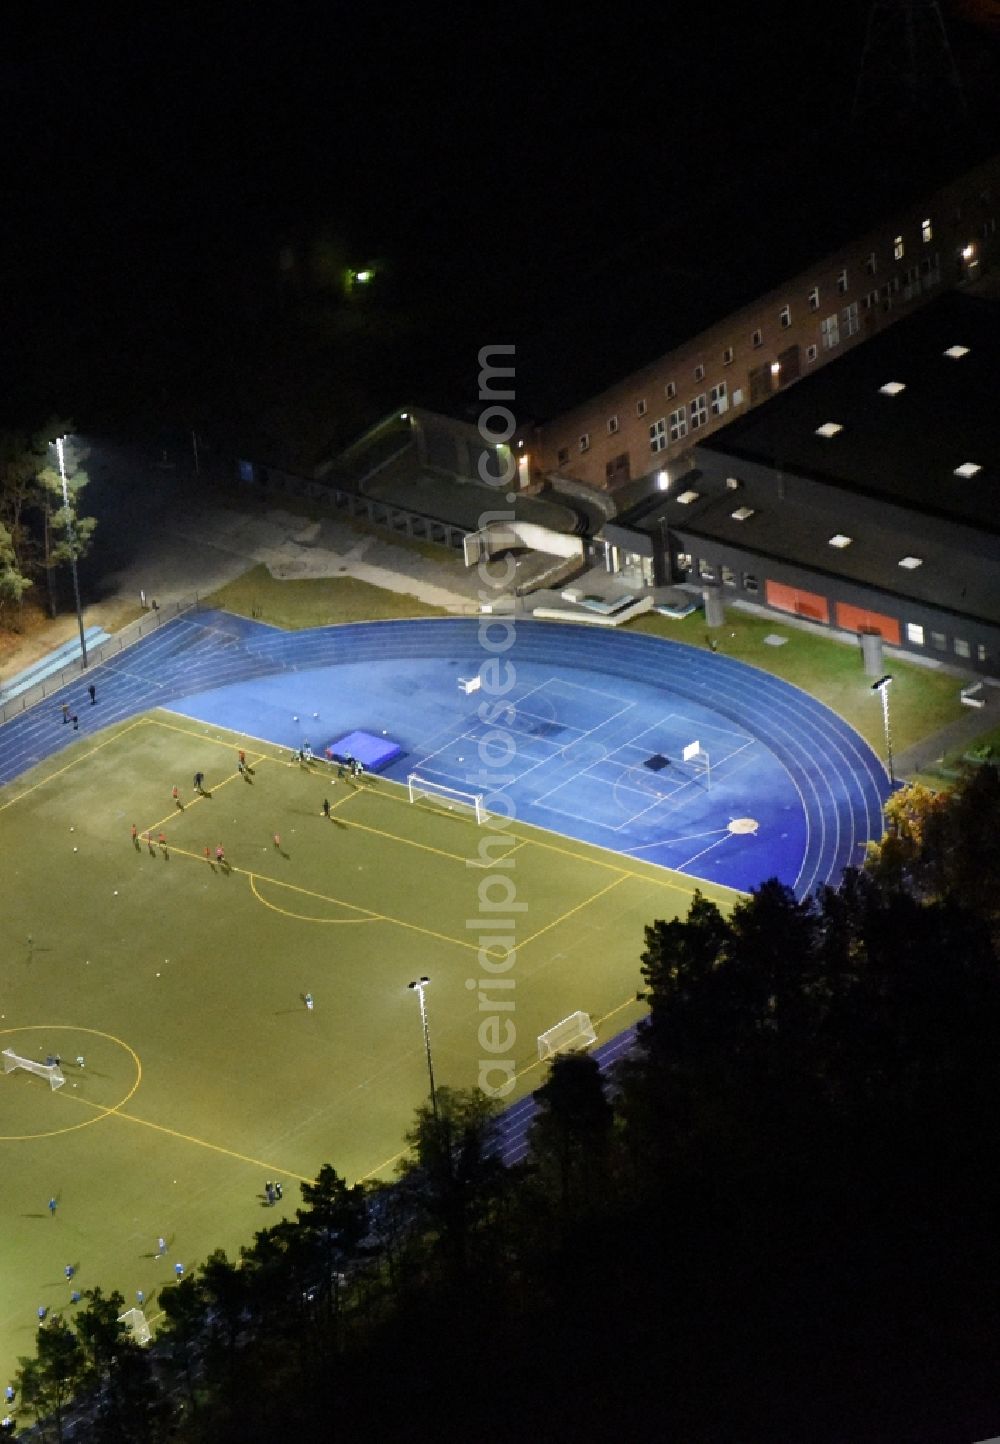 Kleinmachnow at night from above - Night image of the sports facilities of the Berlin Brandenburg International School and residential buildings in Kleinmachnow in the state of Brandenburg. The BBIS includes a football pitch and athletics facilities in a distinct blue colour. Residential buildings and estates as well as a primary school are surrounded by trees and woods